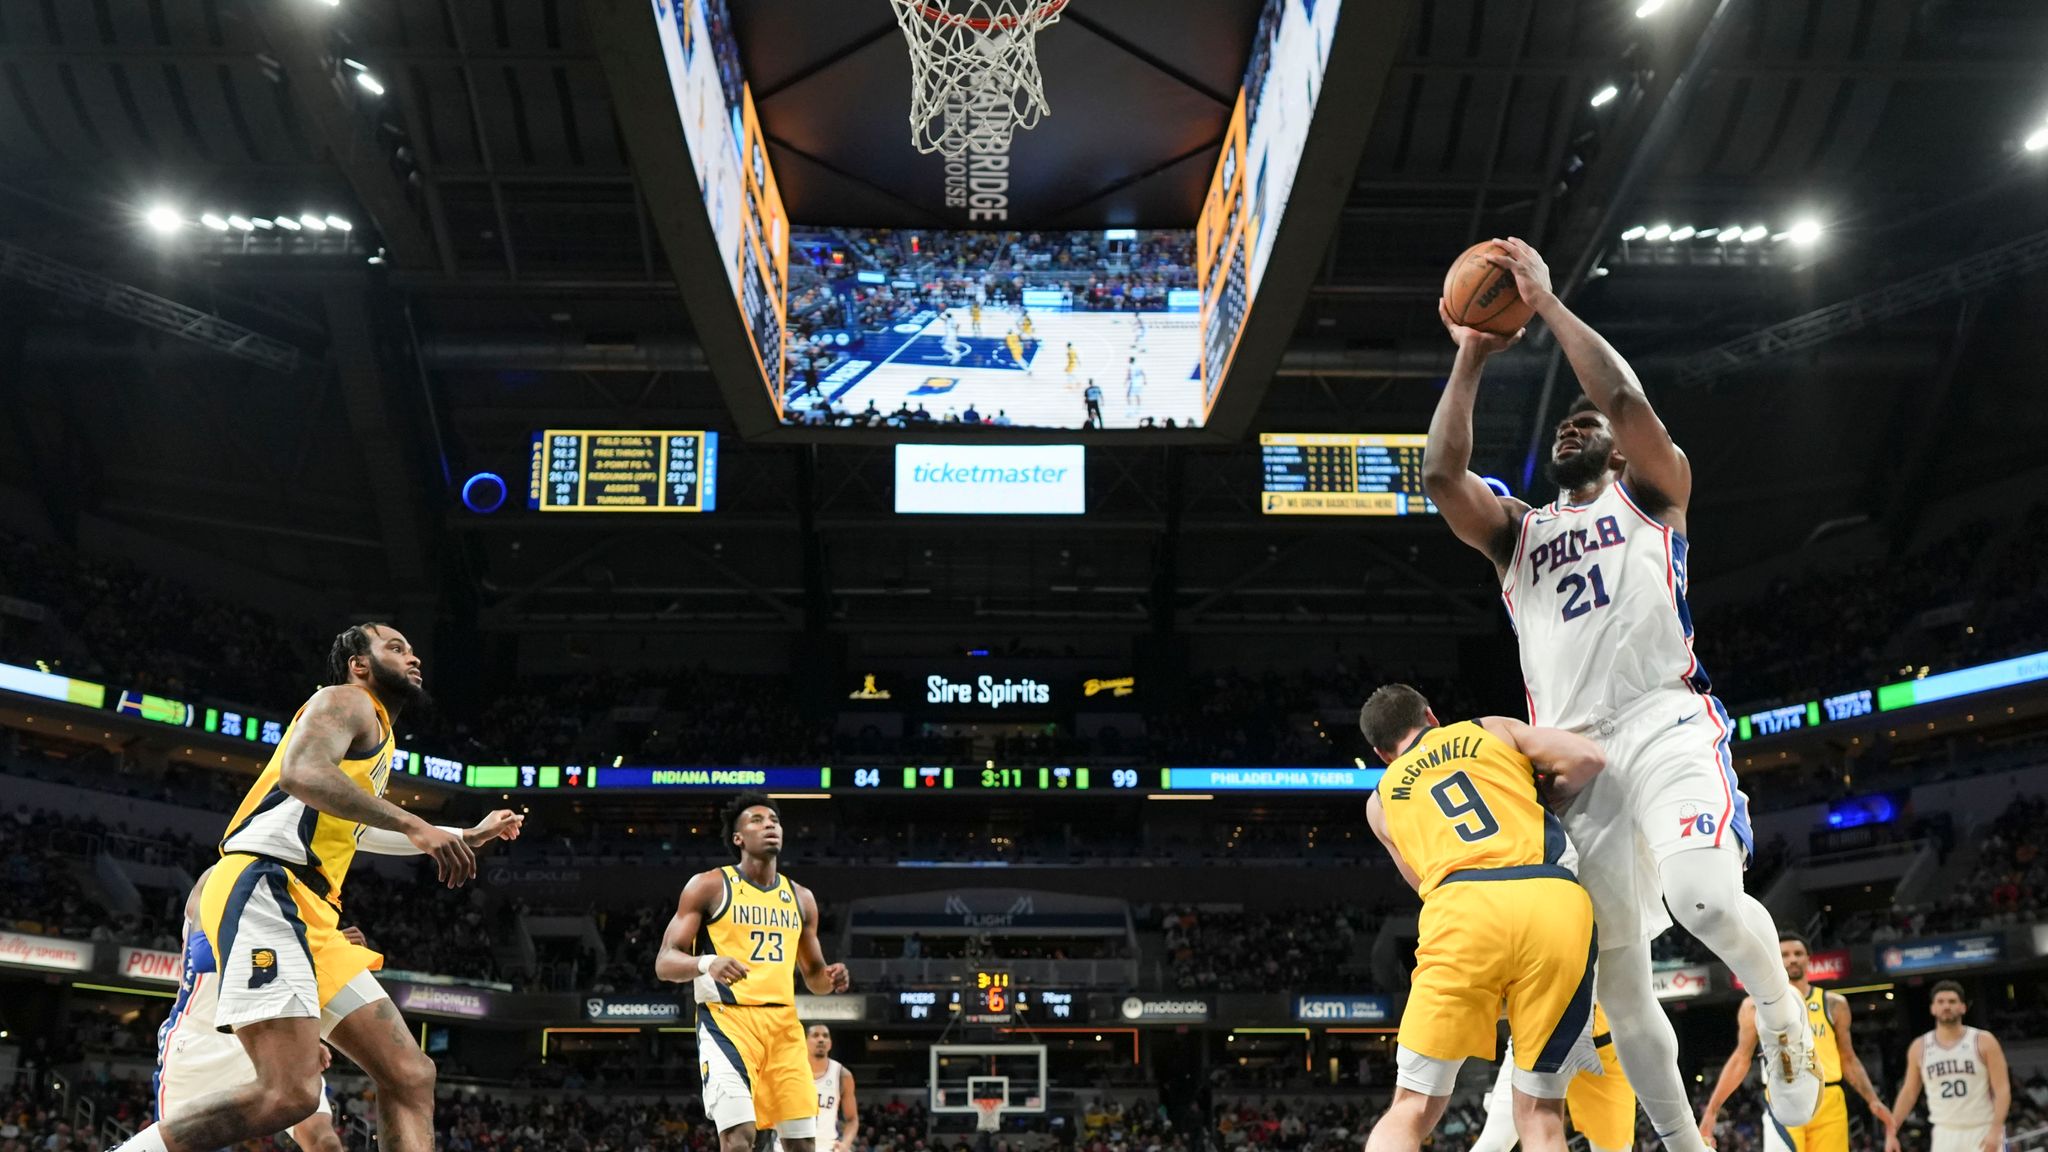 Embiid has 41 points, 20 rebounds as Sixers down Pacers - WHYY